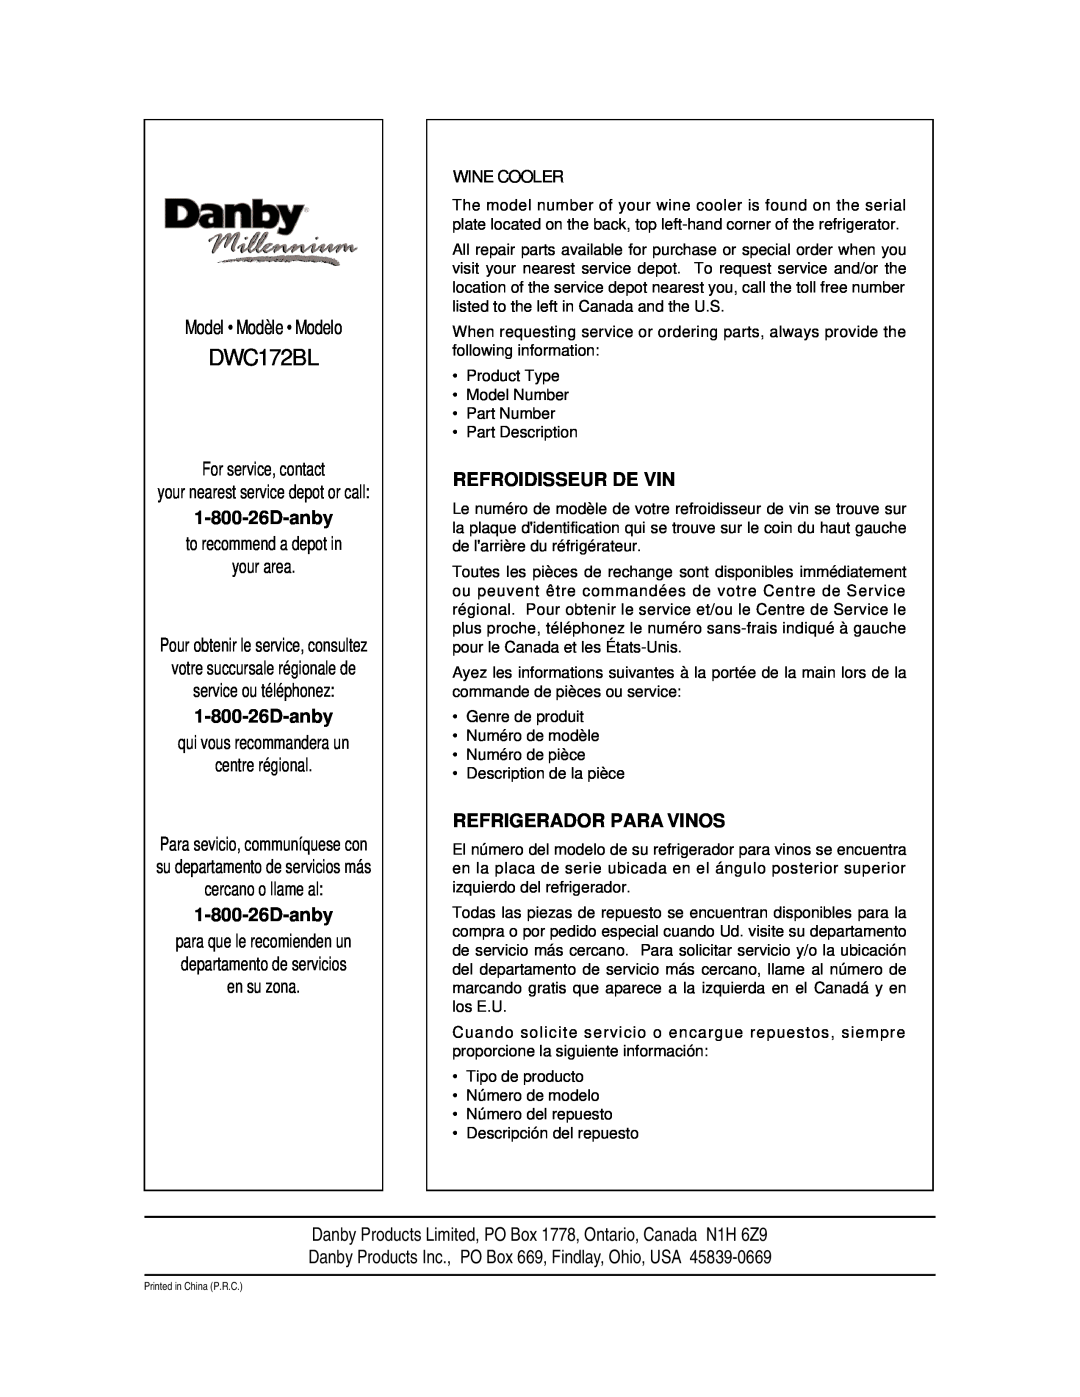 Danby DWC172BL manual Model Modèle Modelo, For service, contact, your nearest service depot or call, Wine Cooler 